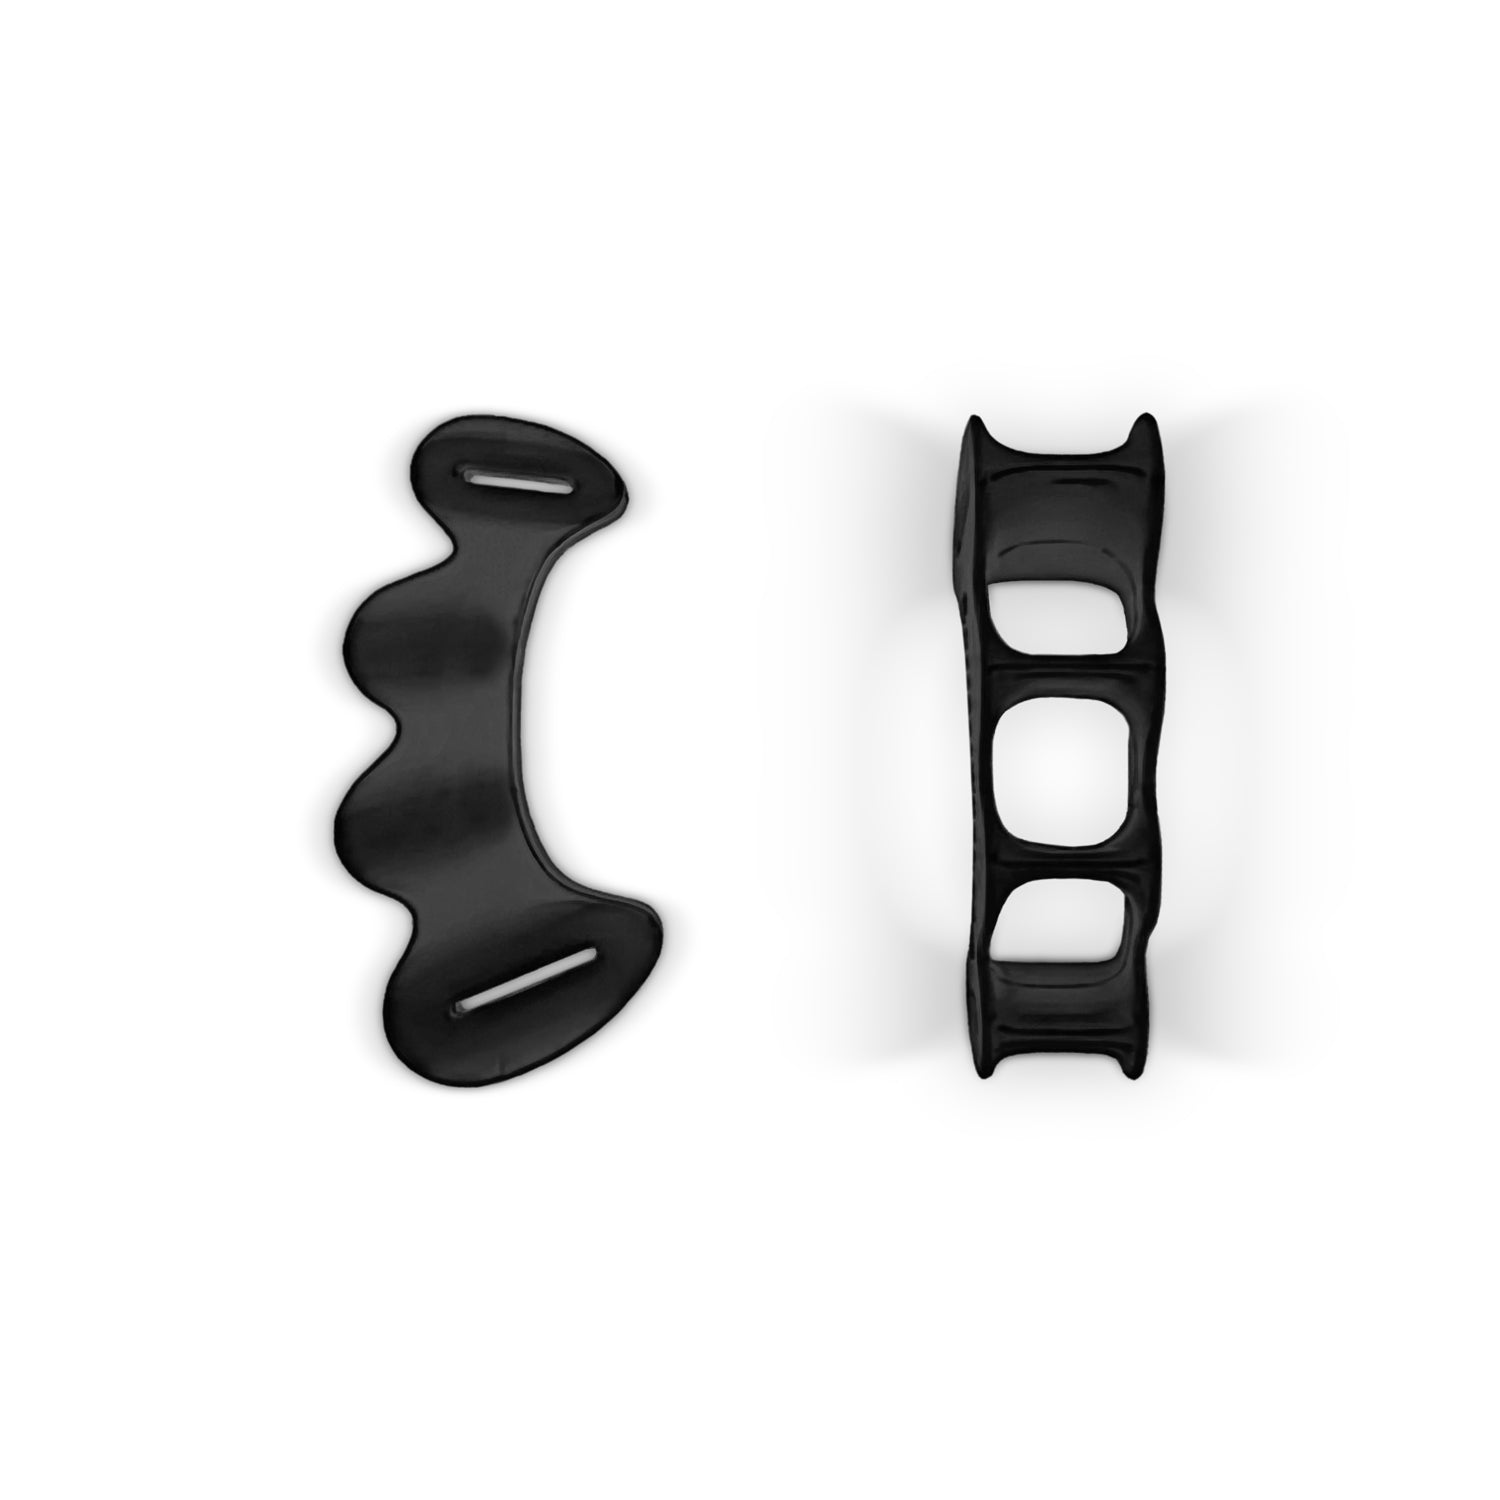 Two black silicon toe spacers, one shown from the top and the other from the side, are components of Bearfoot shoes.